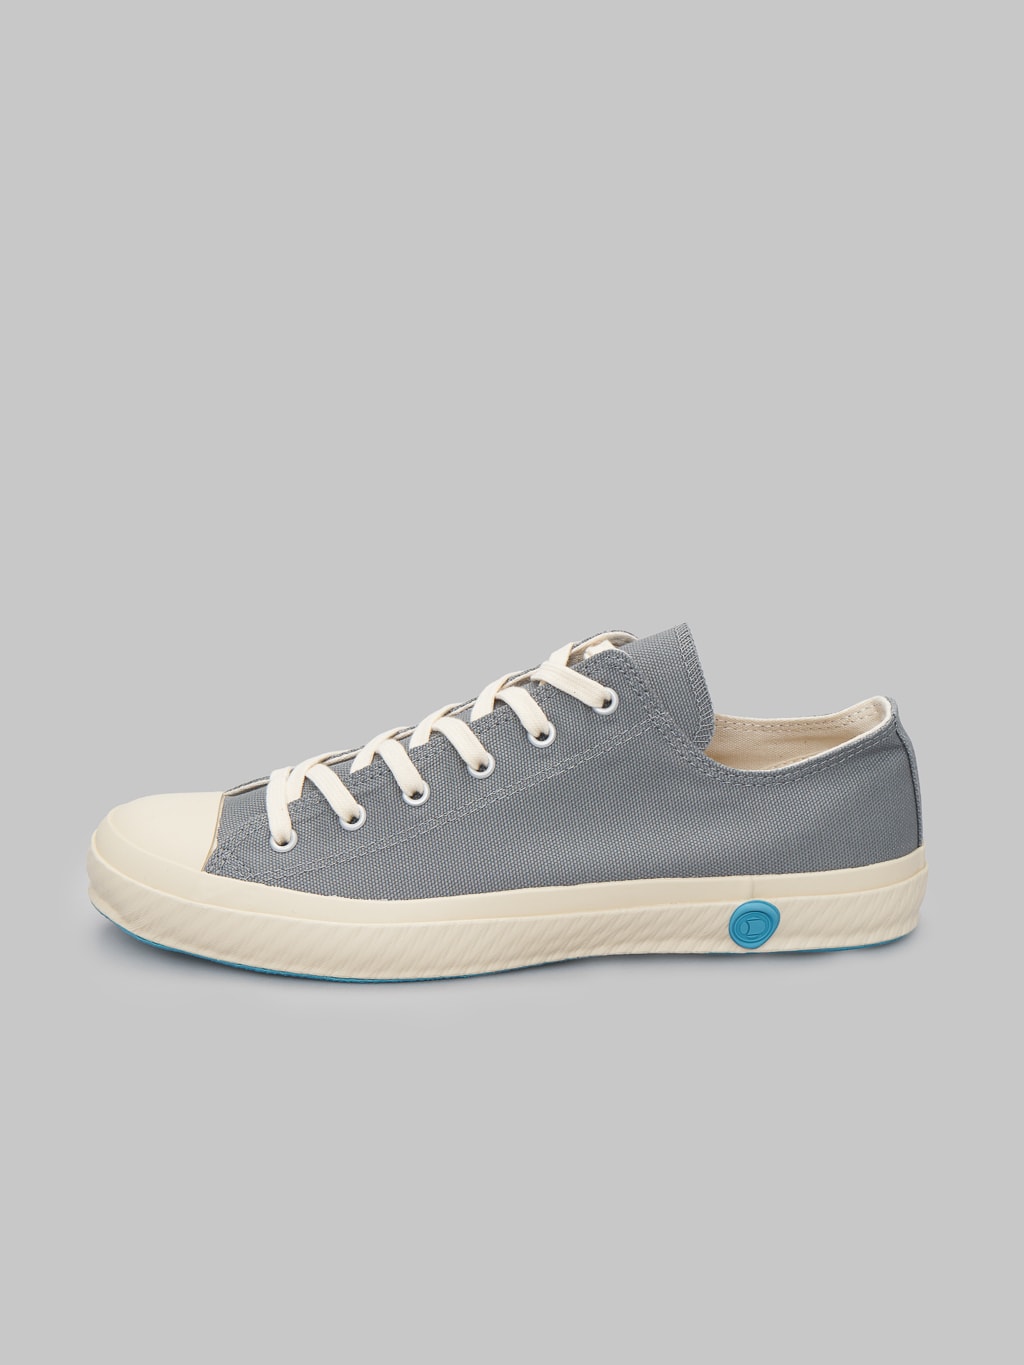 Shoes like pottery low grey sneakers craftsmanship